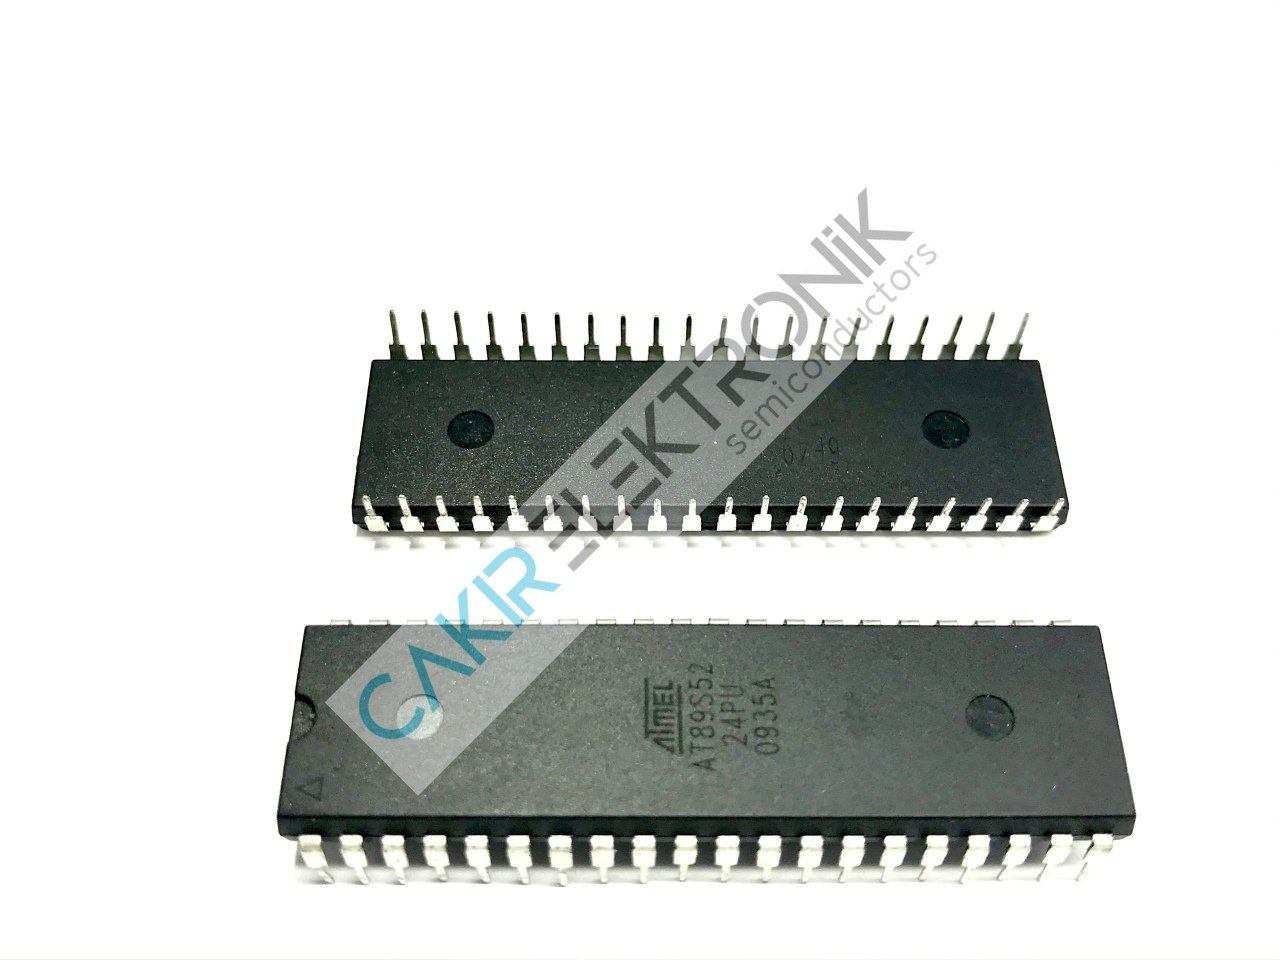 AT89S52-24PU - AT89S52- 8-Bit Microcontroller with 12K Bytes Flash